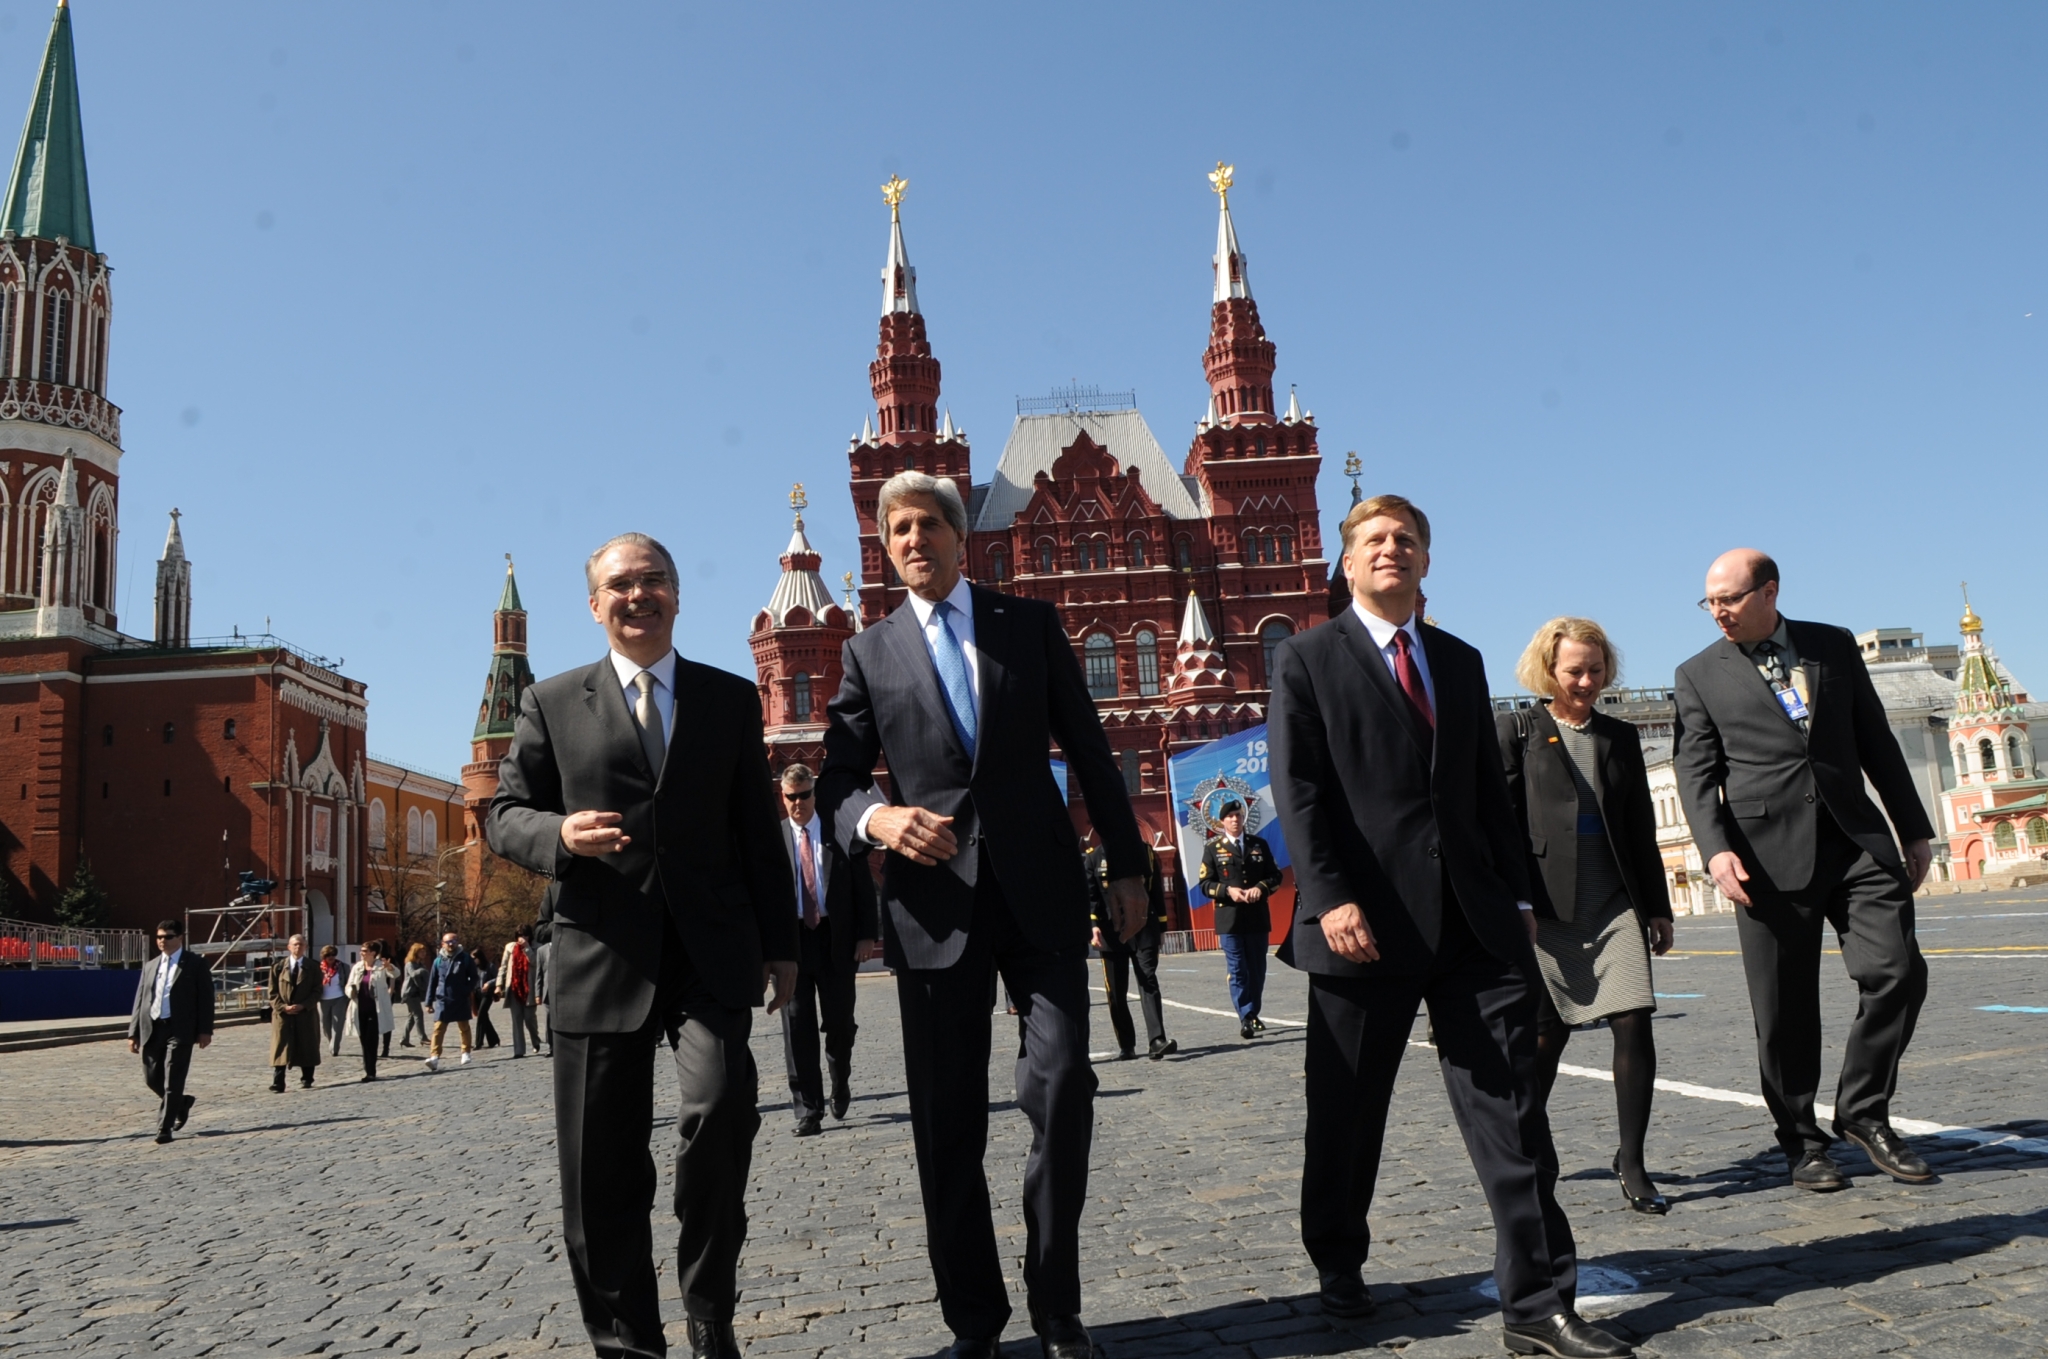 U.S. Secretary of State John Kerry, accompanied by U.S Ambassador to Russia Michael McFaul, right, and Russian Chief of Protocol Yuriy Filatov, left, tours Red Square during his visit to Moscow, Russia, on May 7, 2013. [State Department photo/ Public Domain]